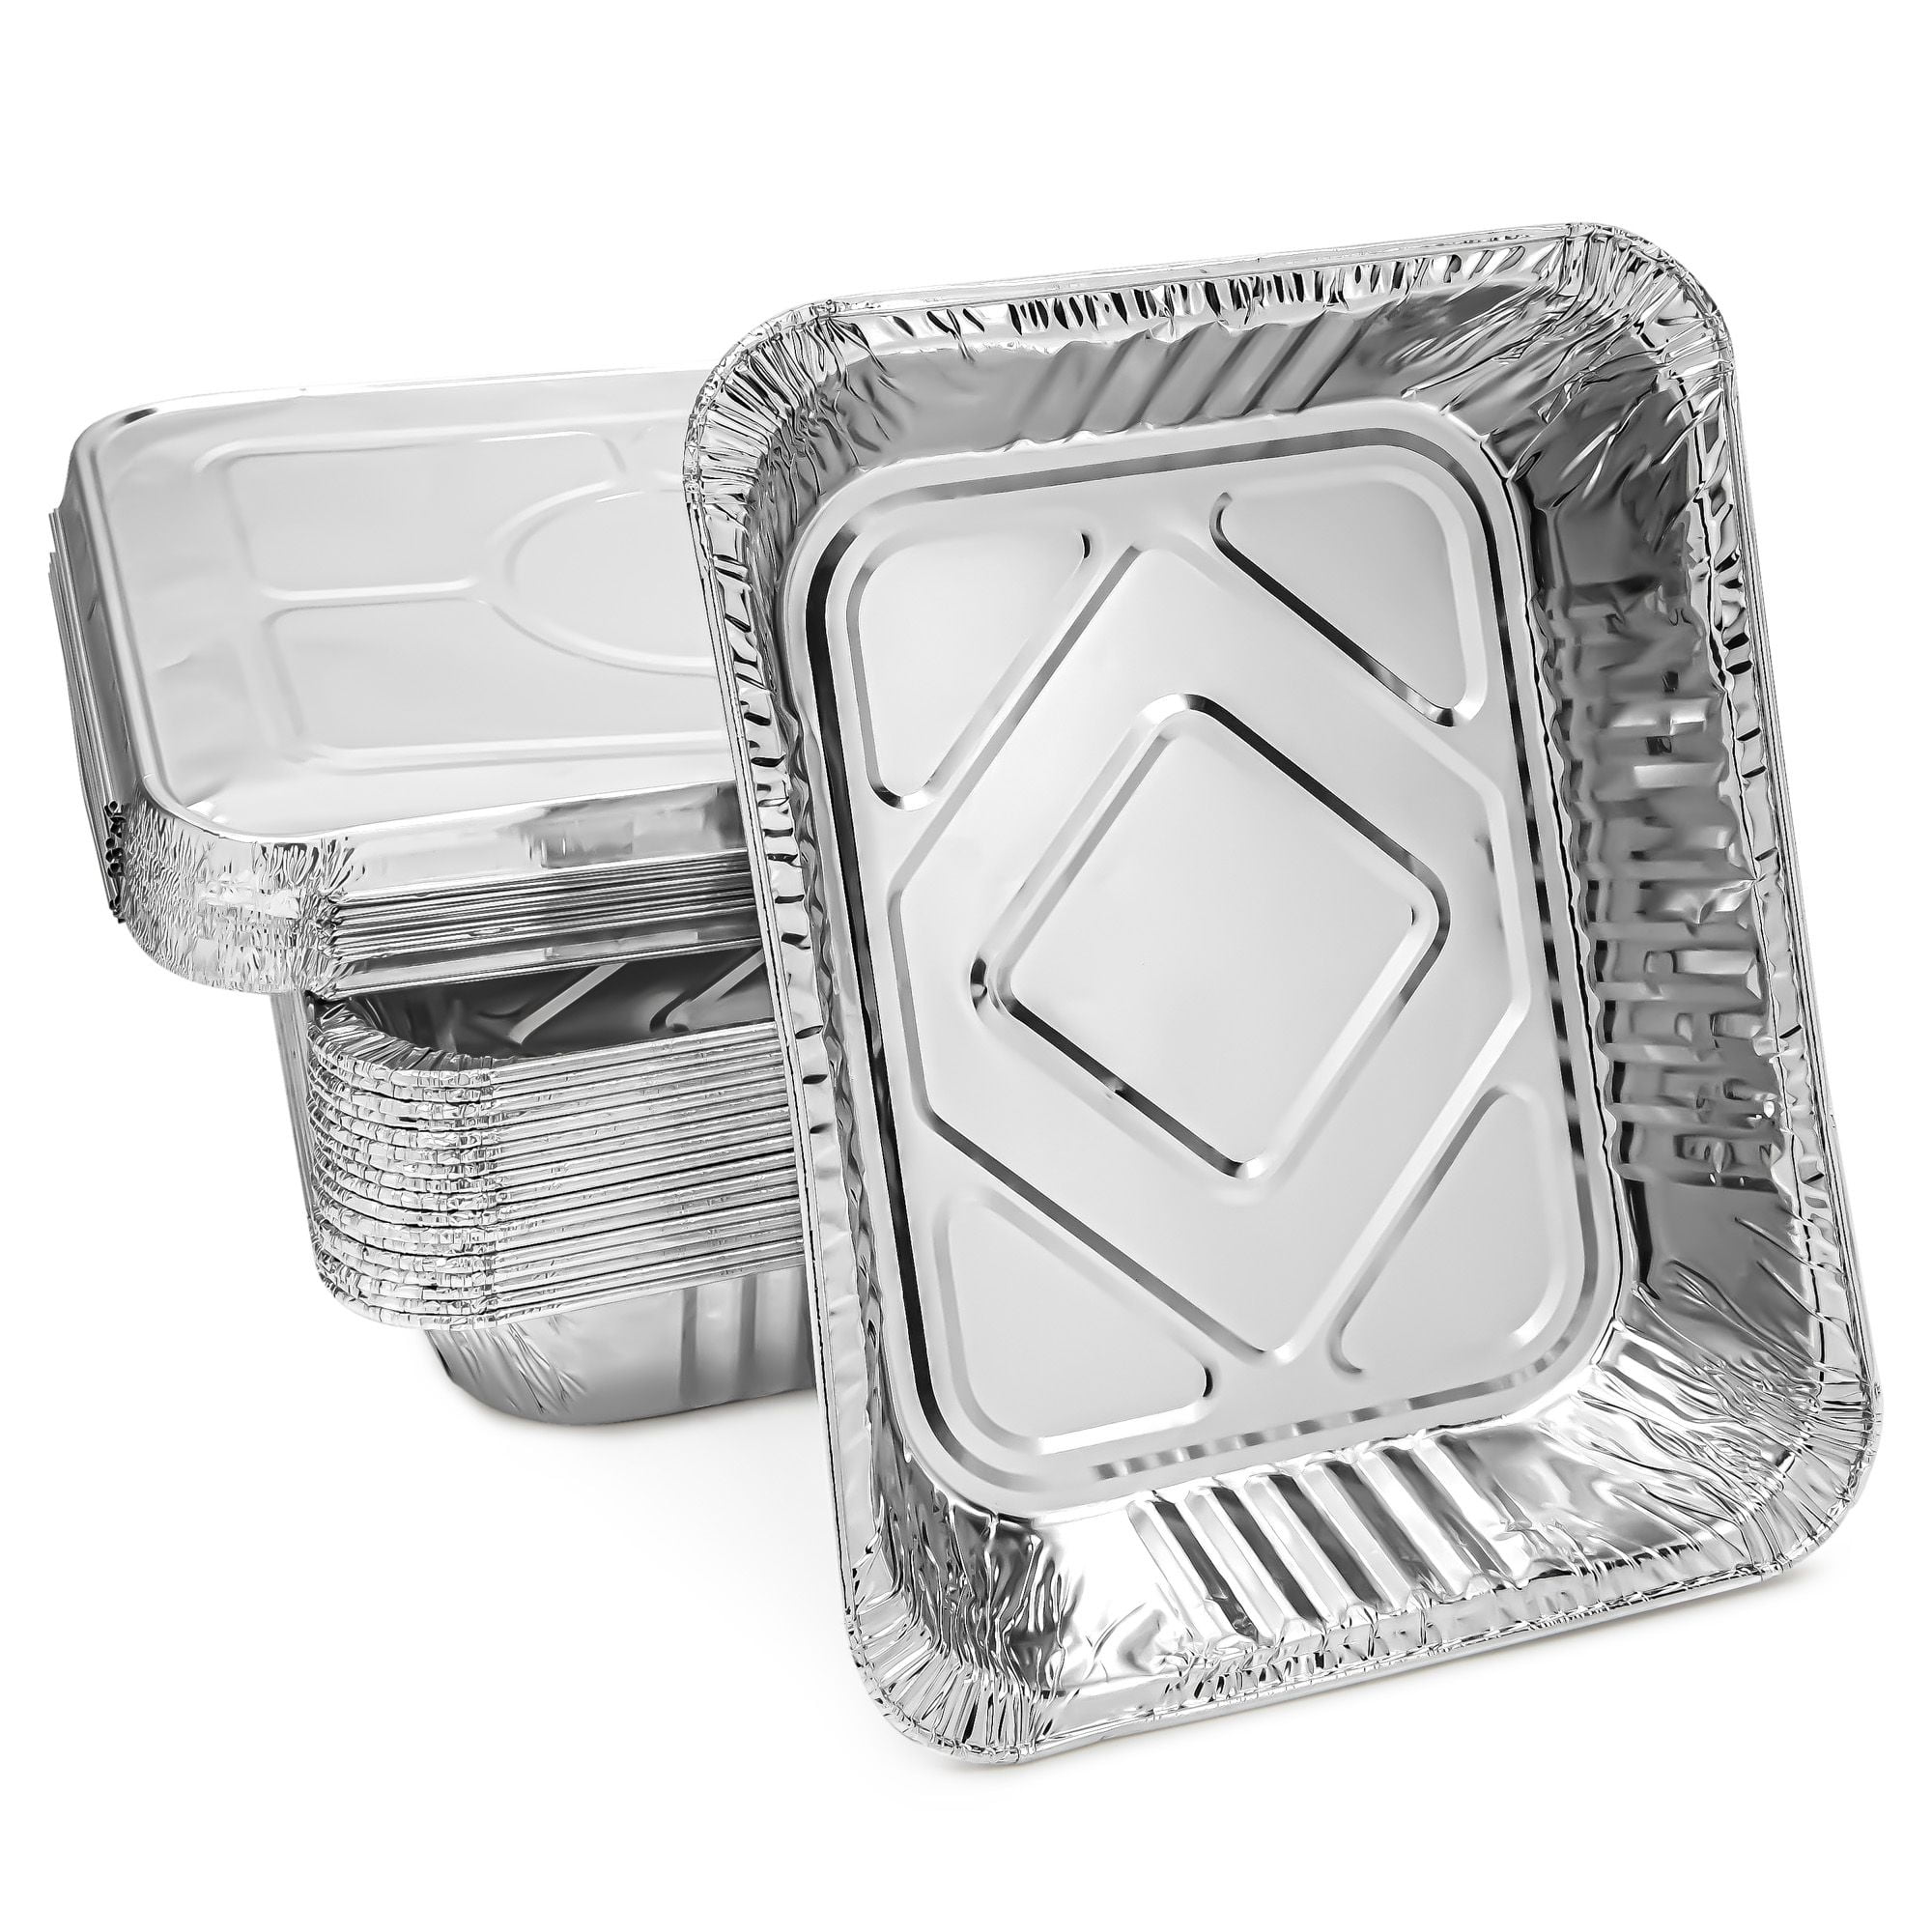 9x13 Foil Pans with Lids (25-Pack) - Extra Heavy Duty - Deep Half-Size Disposable Aluminum Pans W/Lids. Great for Baking, Cooking, Grilling